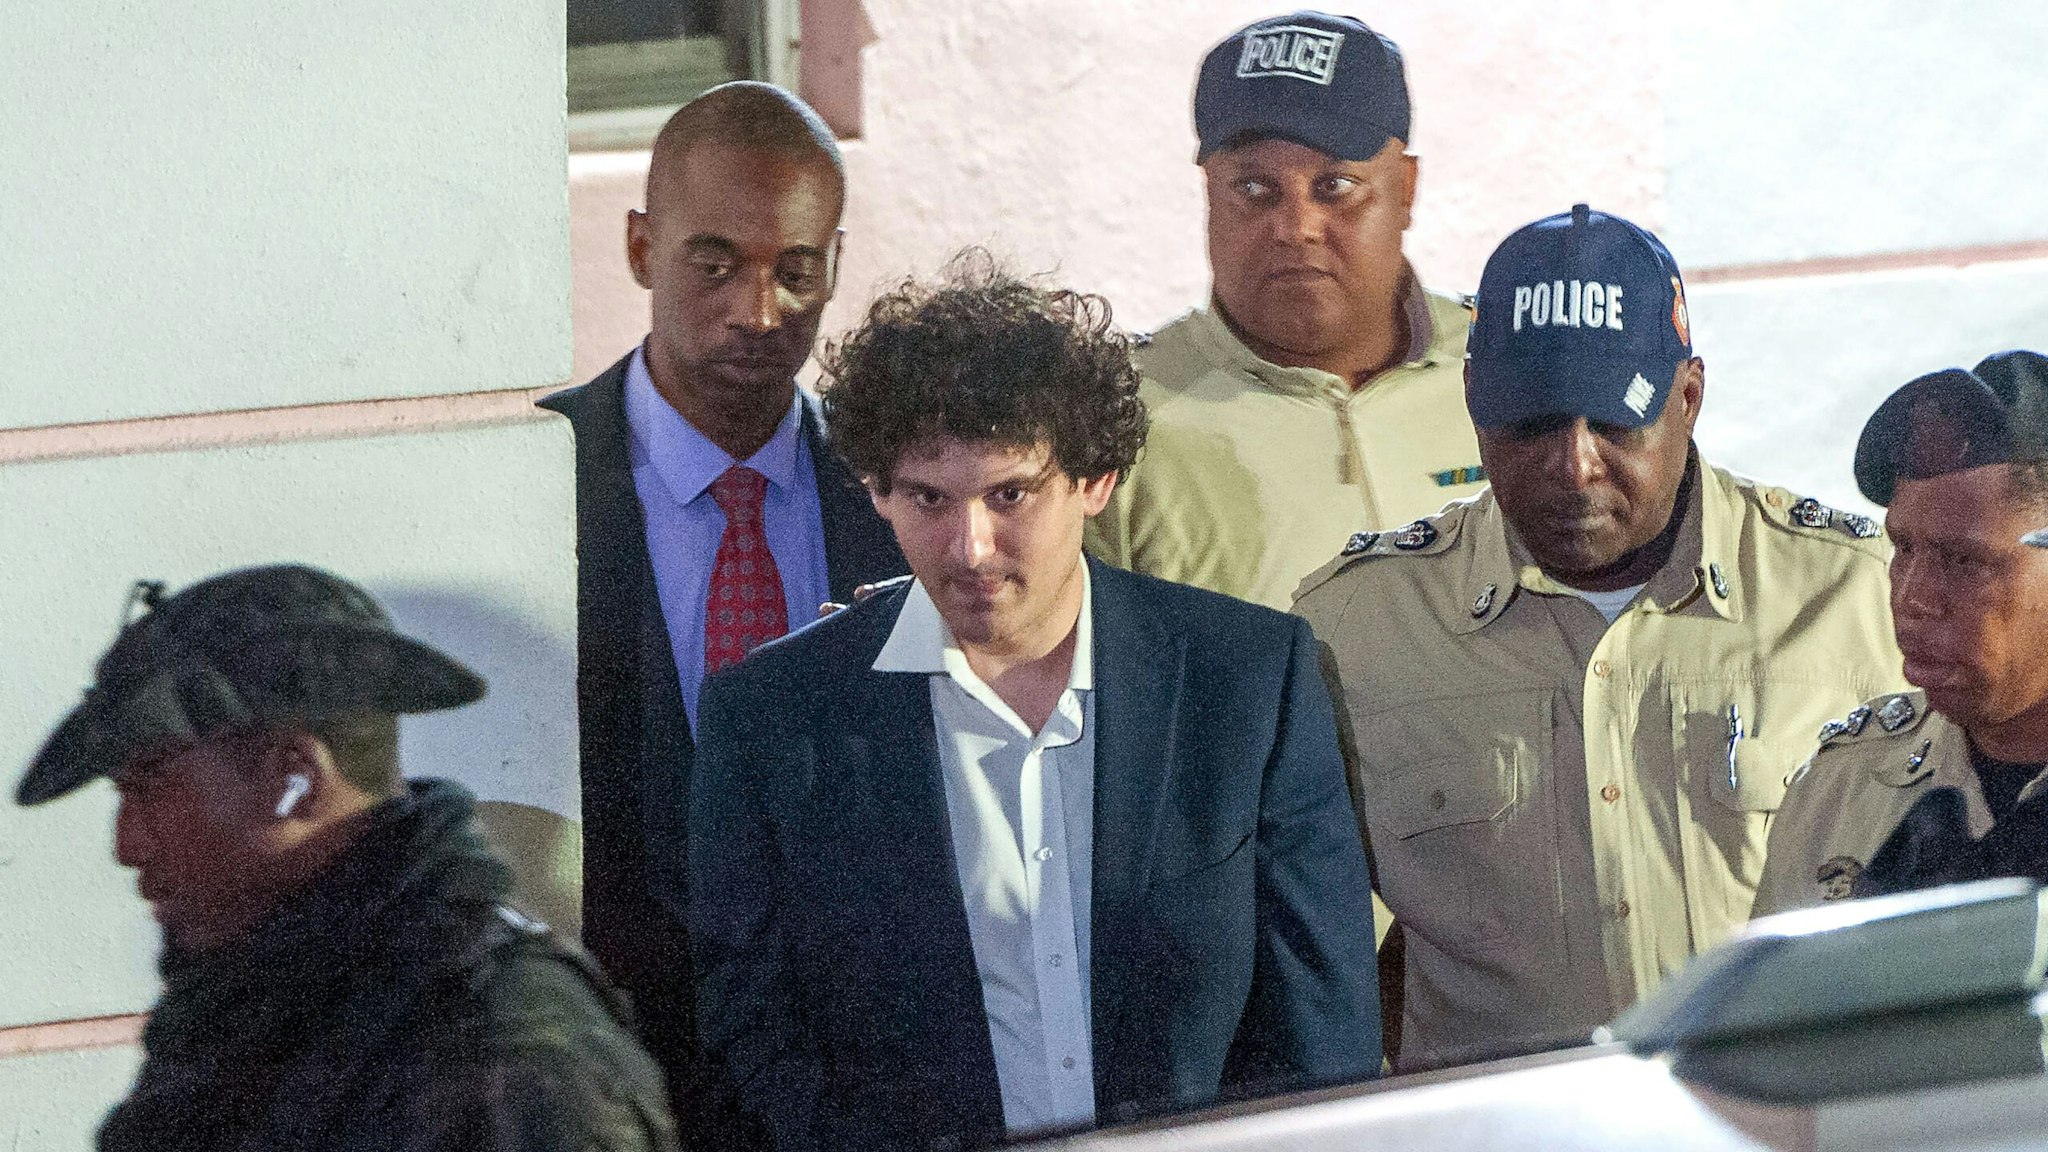 TOPSHOT - FTX founder Sam Bankman-Fried (C) is led away handcuffed by officers of the Royal Bahamas Police Force in Nassau, Bahamas on December 13, 2022. - Disgraced cryptocurrency tycoon Sam Bankman-Fried was hit with multiple criminal charges December 13, 2022, accused of committing one of the biggest financial frauds in US history. Bankman-Fried will serve time at The Bahamas Department of Corrections until February 8, 2023.